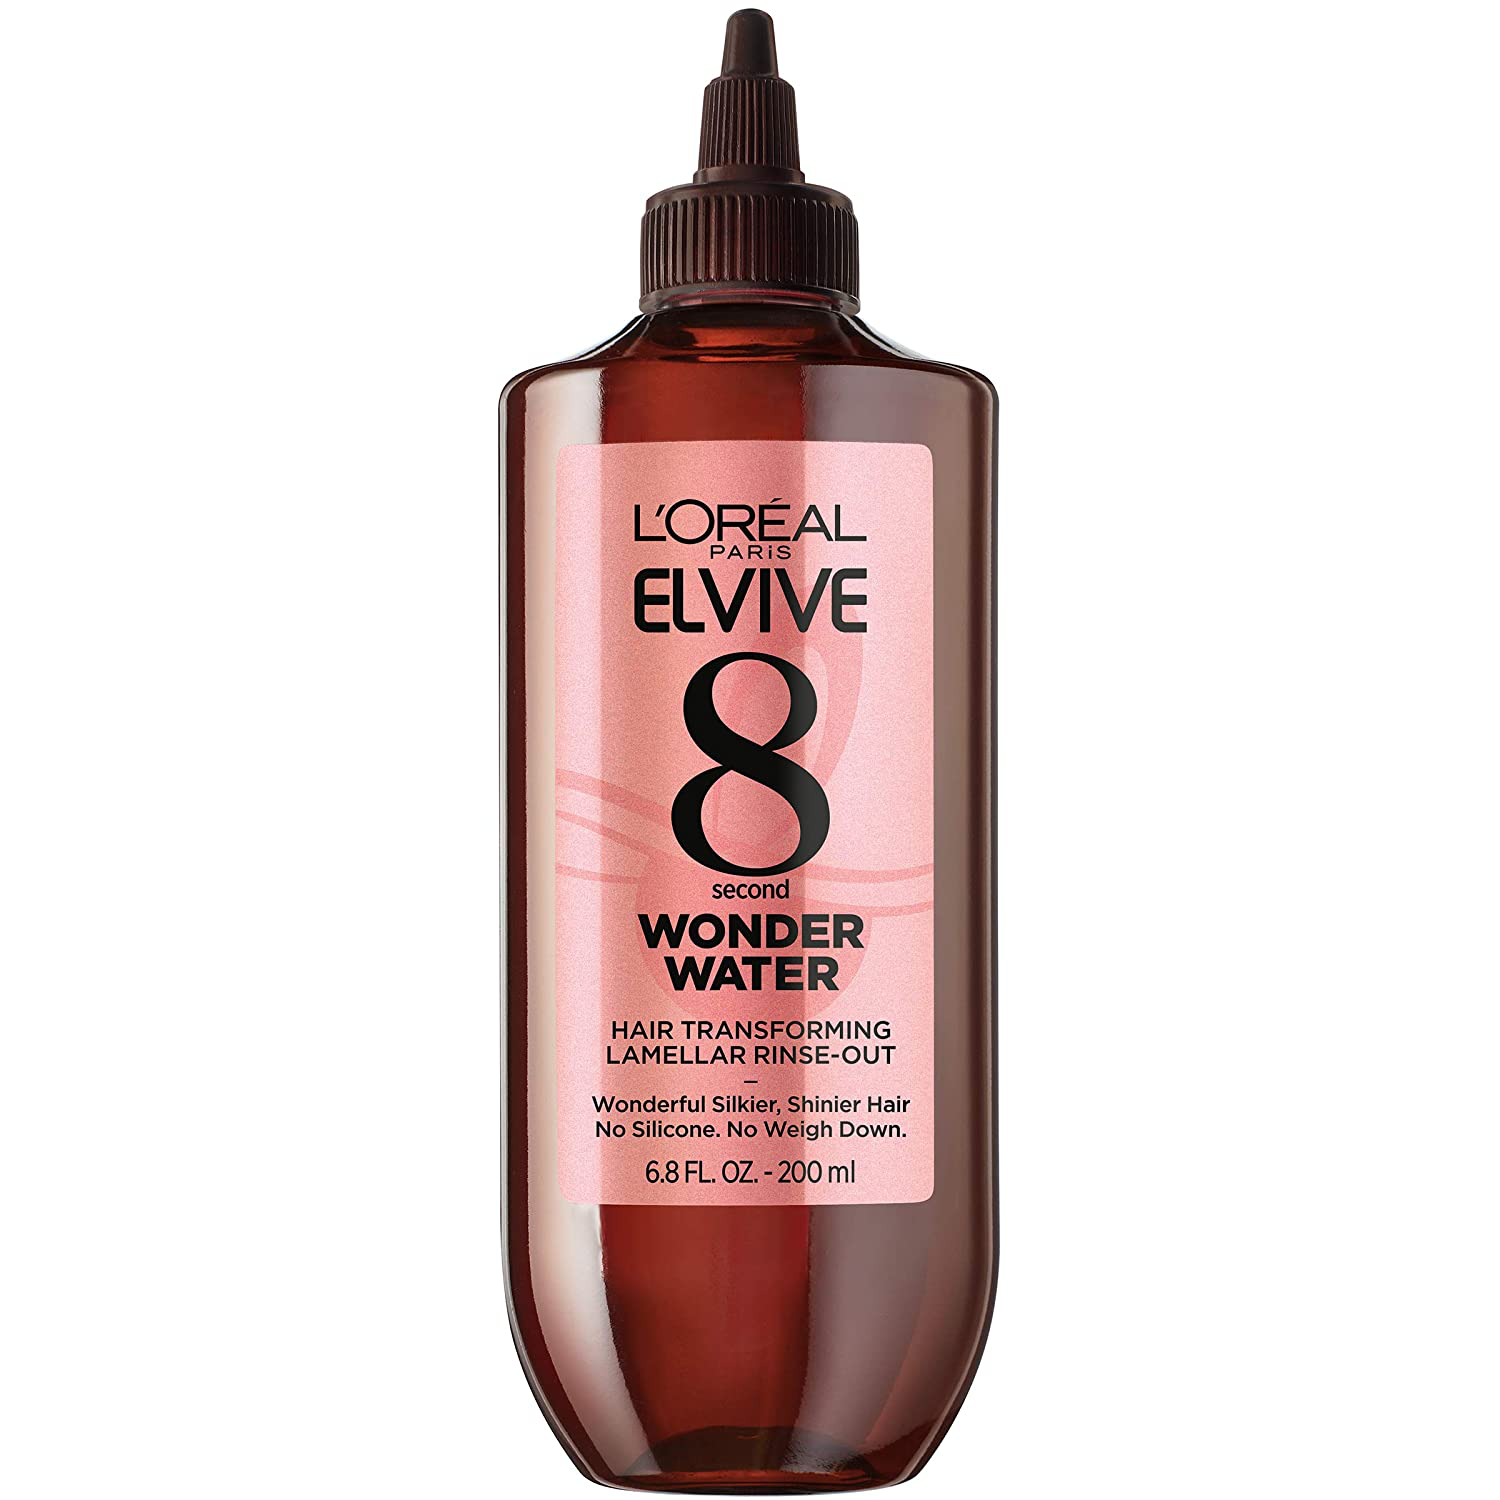 L'Oreal Paris Elvive 8 Second Wonder Water Lamellar, Rinse Out Moisturizing Hair Treatment for Silky, Shiny Looking Hair, 6.8 Fl Oz